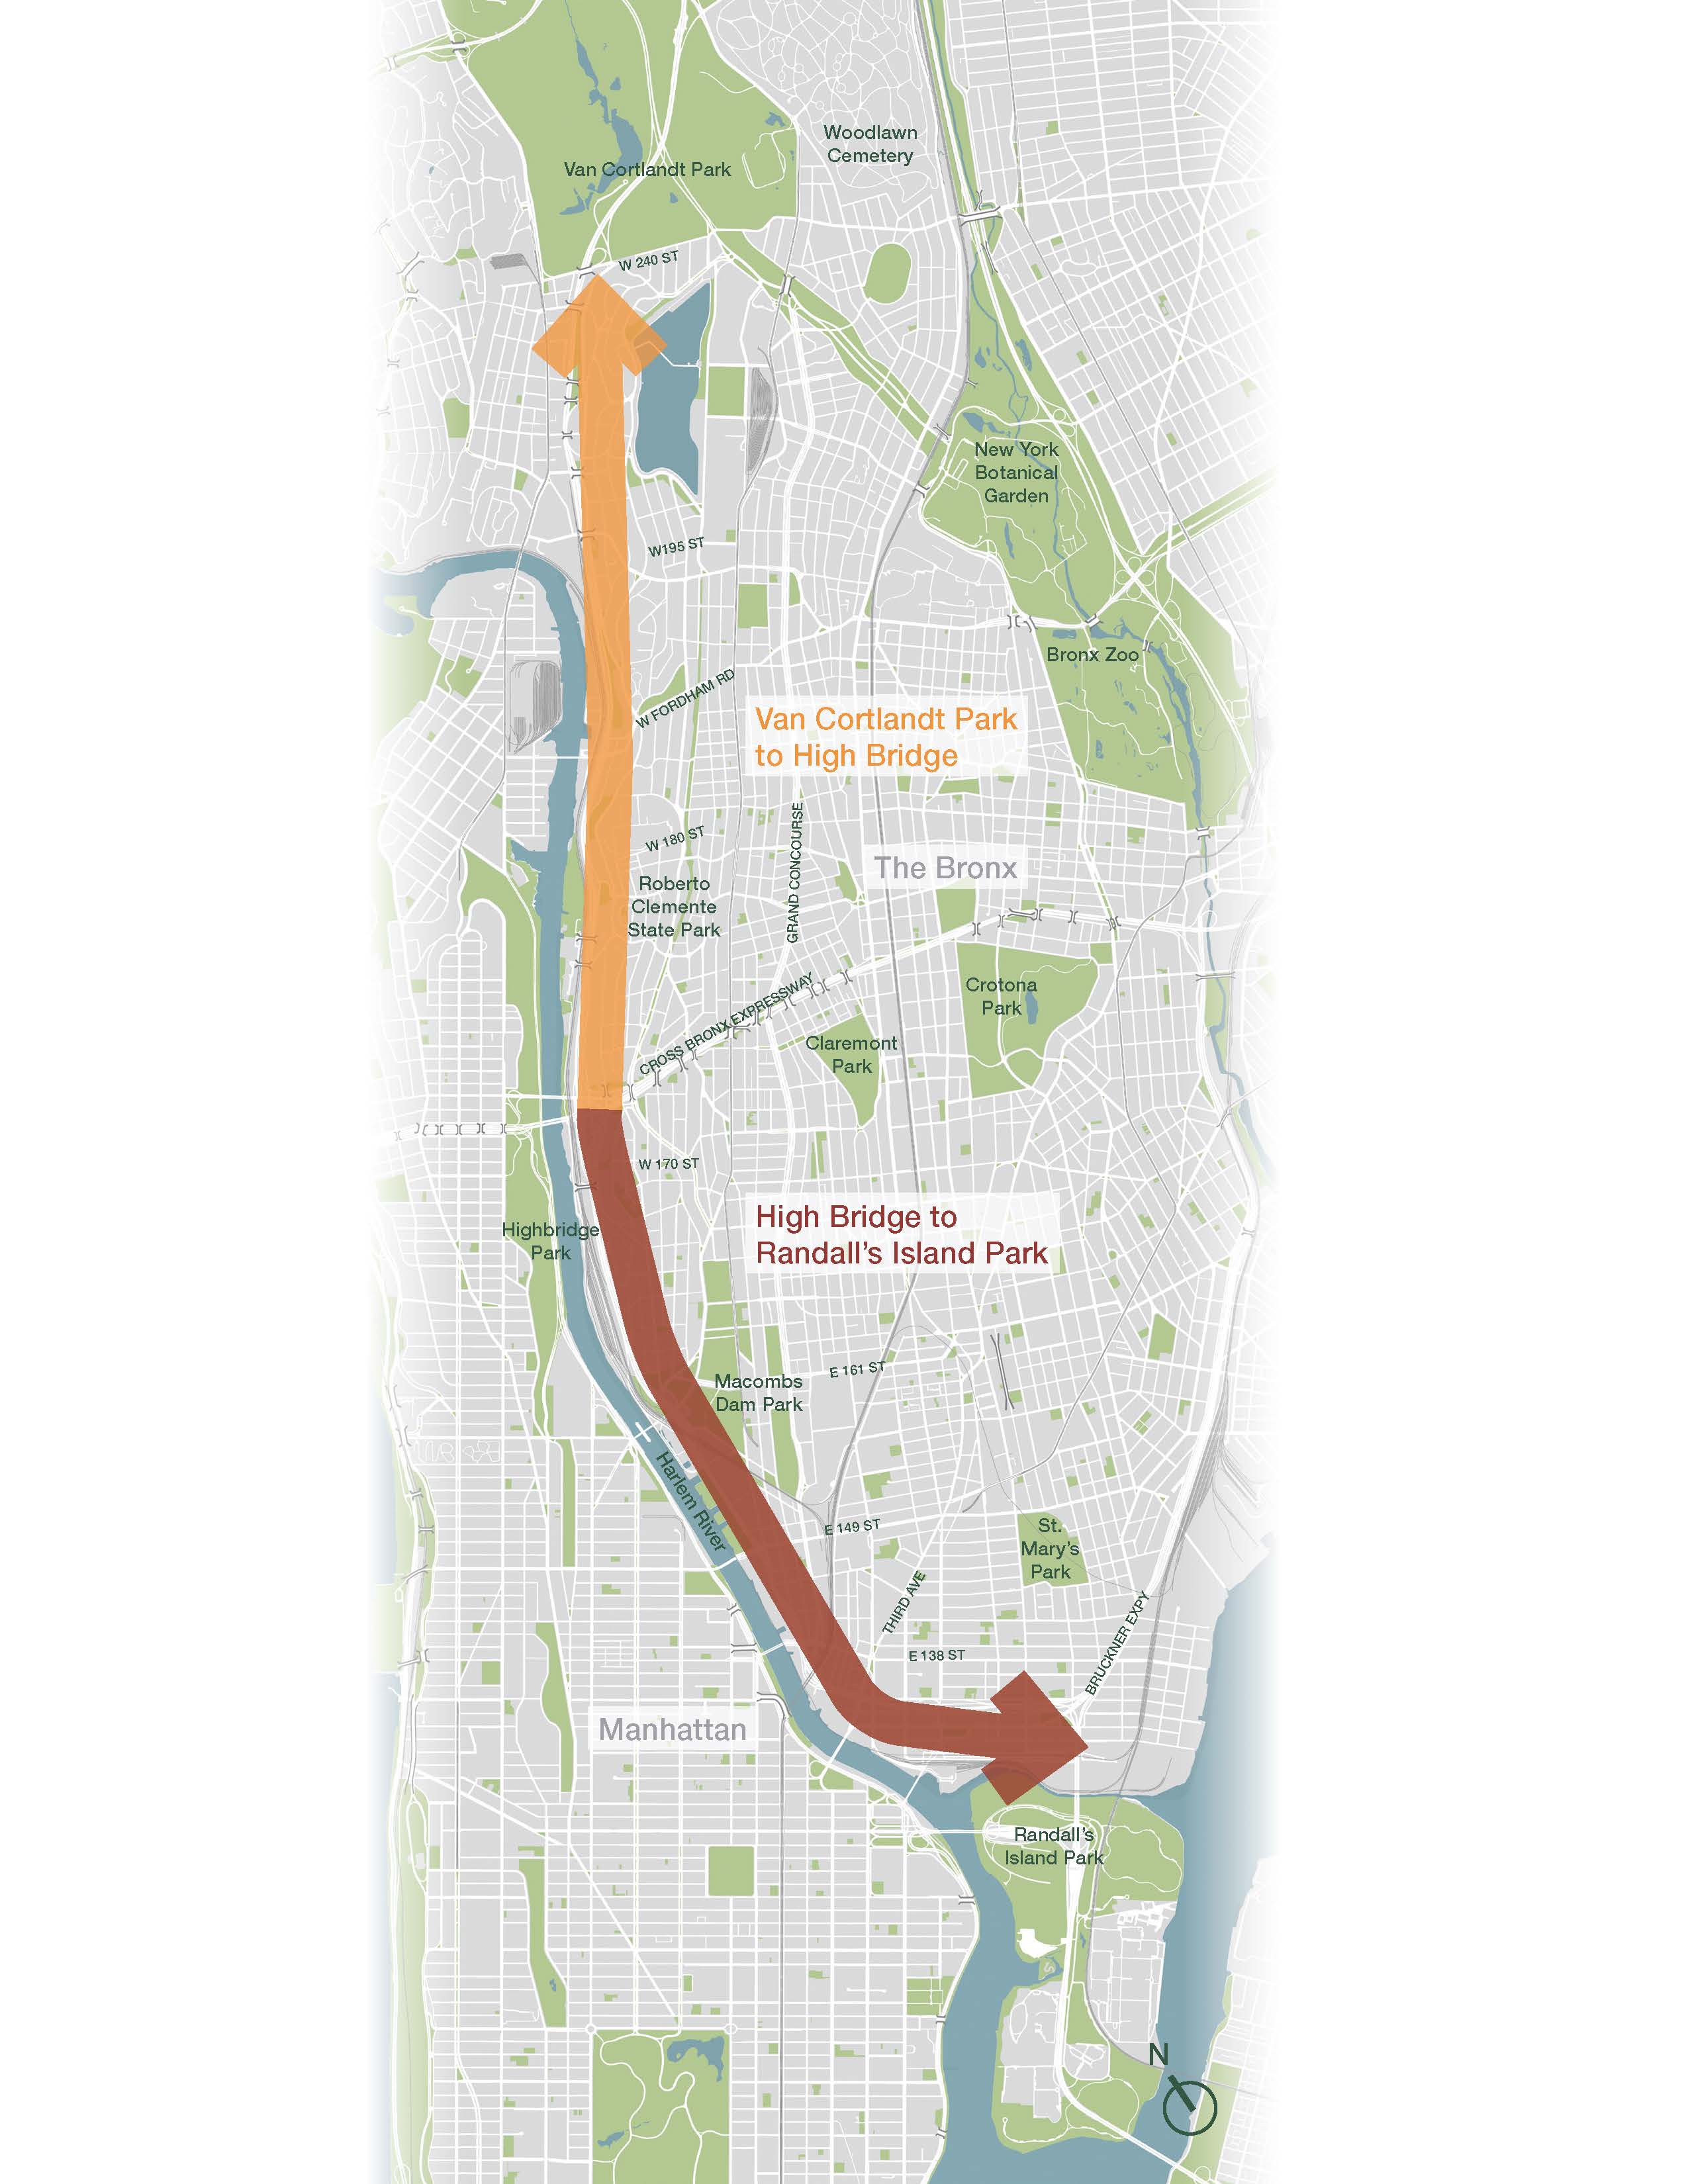 Map detailing the two segments of the Harlem River Greenway, with the northern half running from Van Cortlandt Park to the High Bridge, and southern half running from the High Bridge to Randall's Island Park.